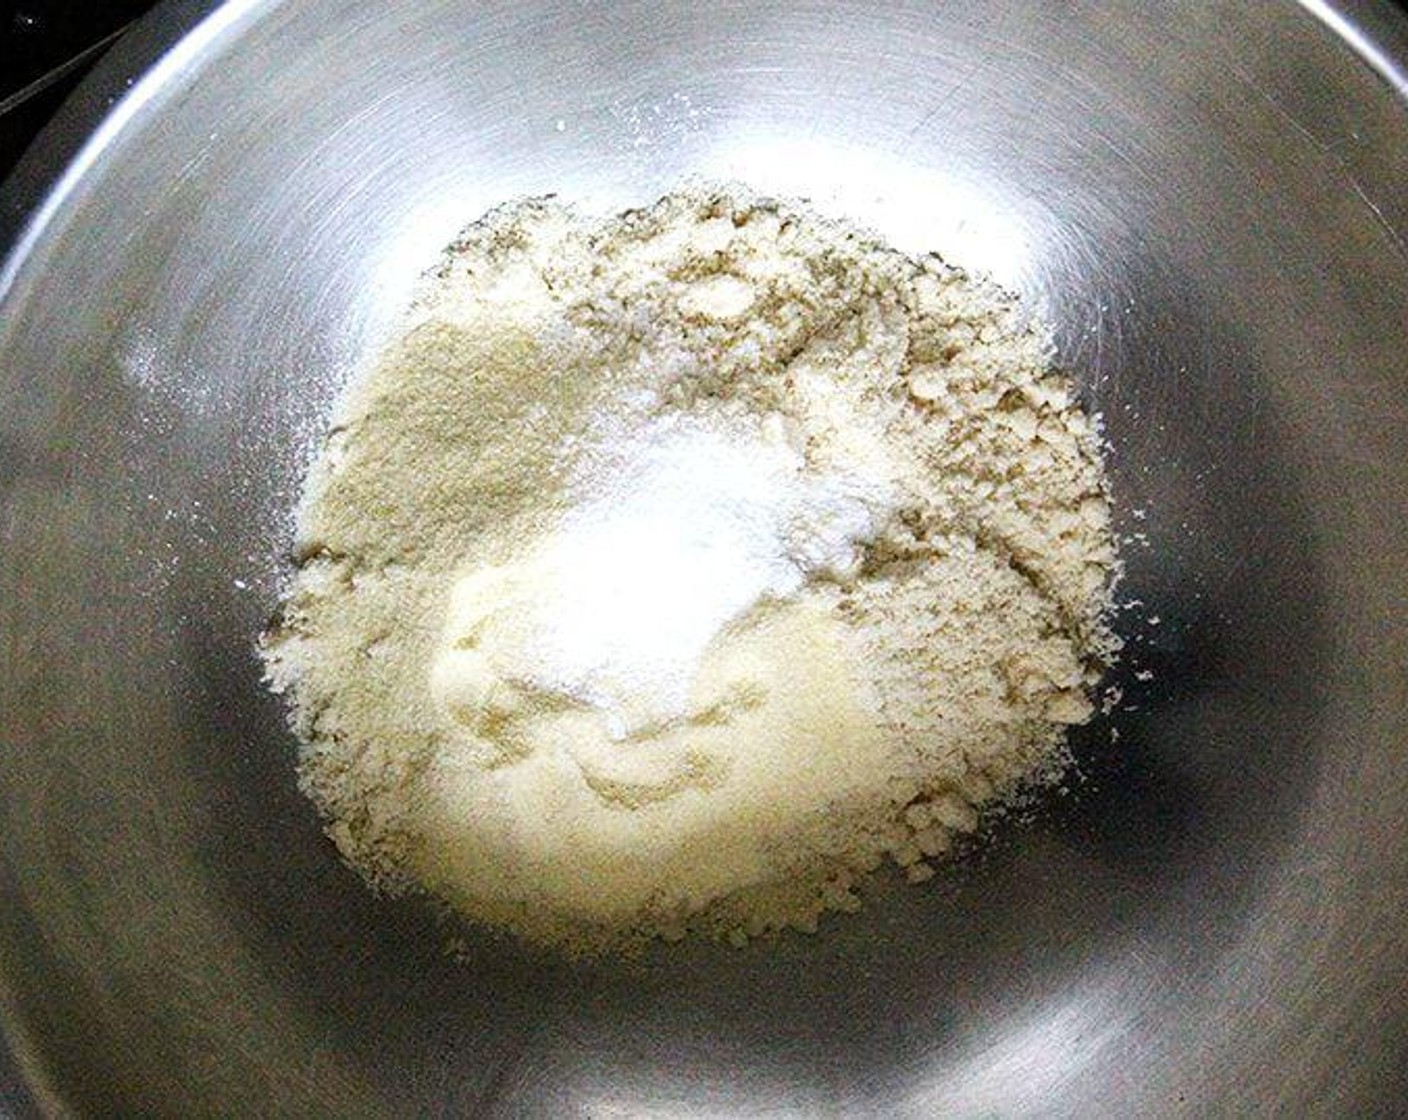 step 3 Whisk together the Almond Flour (1 1/2 cups), Semolina Flour (1/2 cup), Baking Powder (1 tsp), and Kosher Salt (1/2 tsp) in a medium bowl to combine.